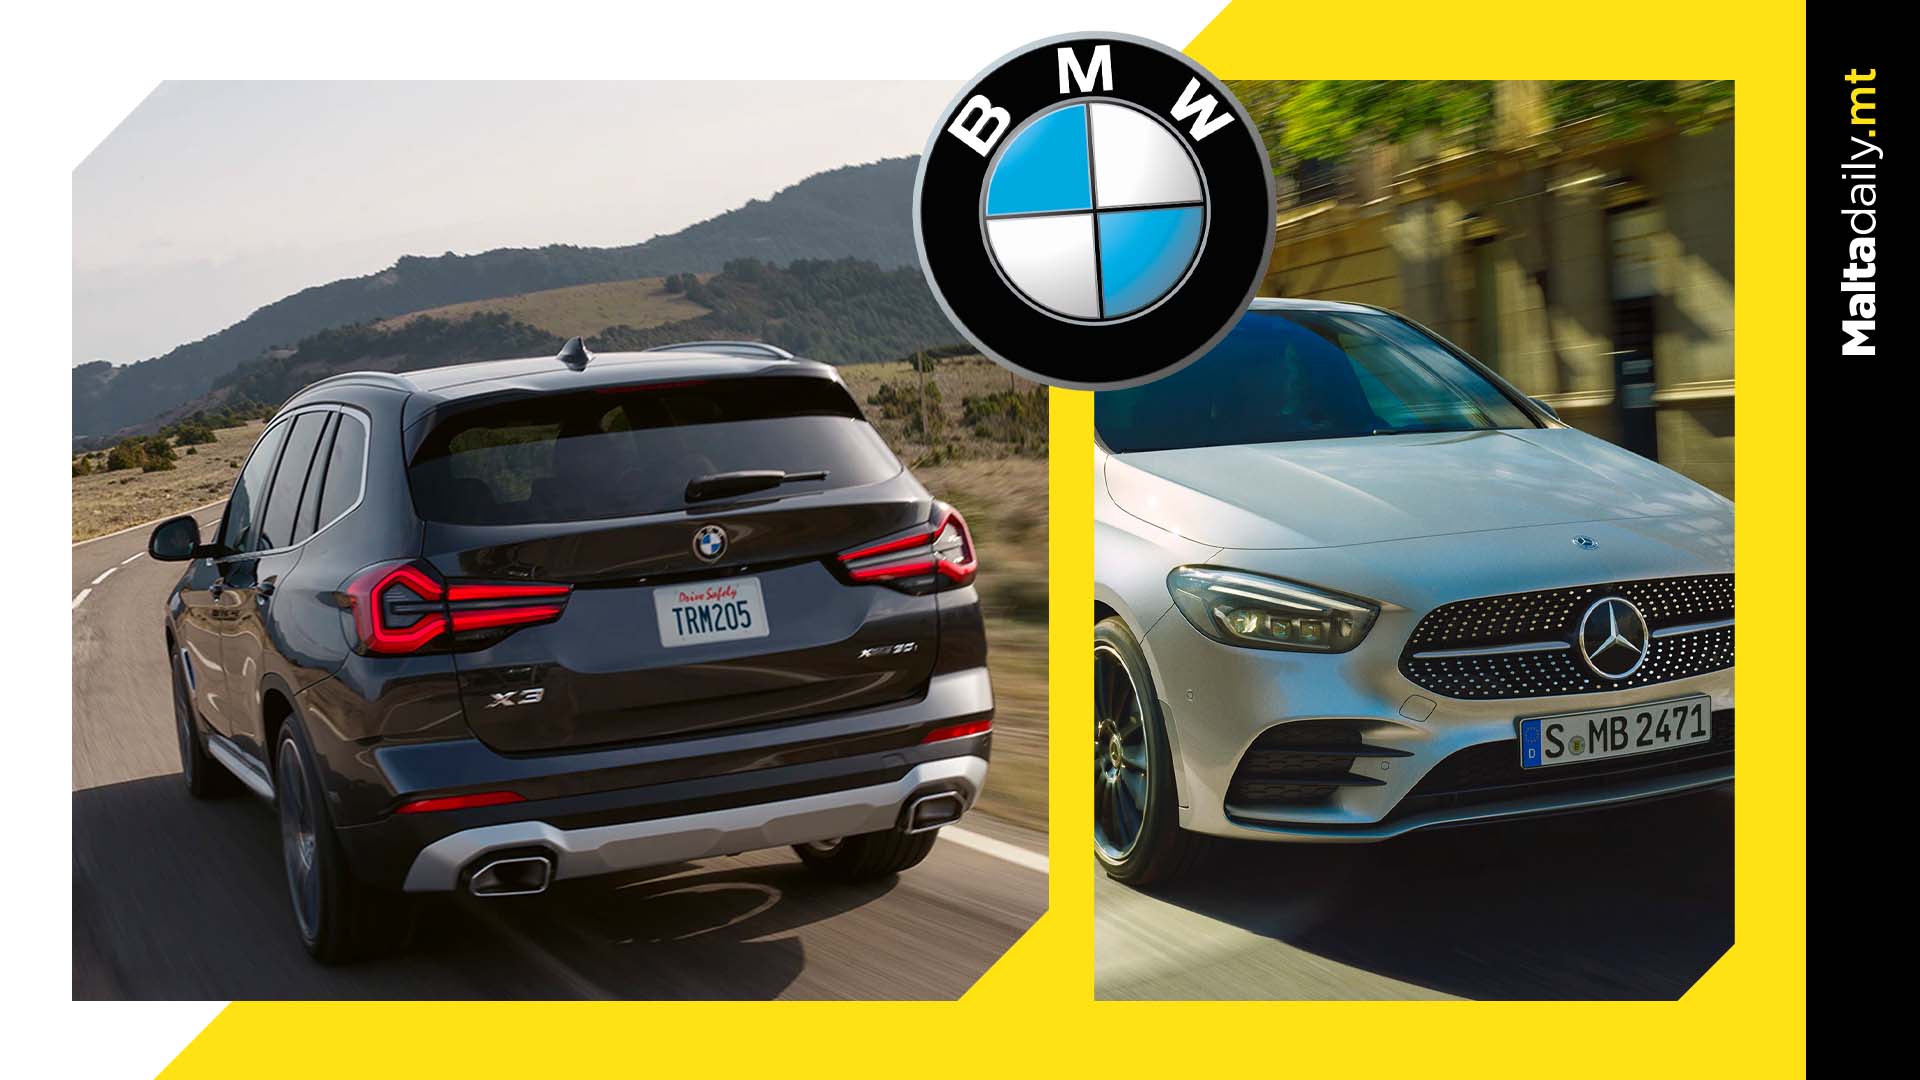 BMW outsells Mercedes & Audi for 2nd year in a row